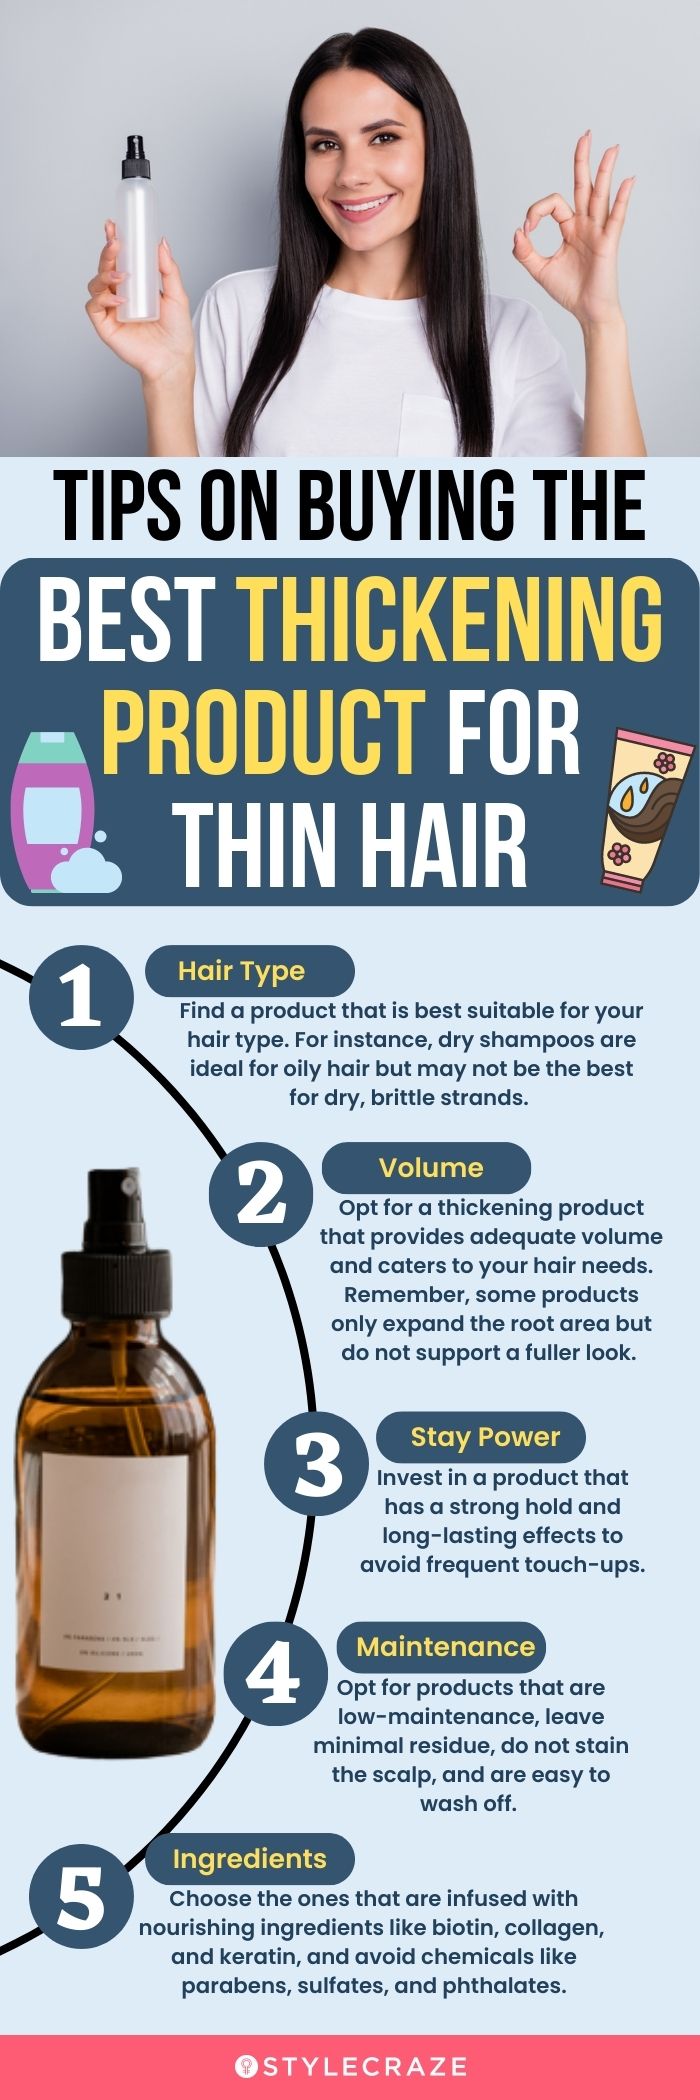 Tips On Buying The Best Thickening Product For Thin Hair (infographic)